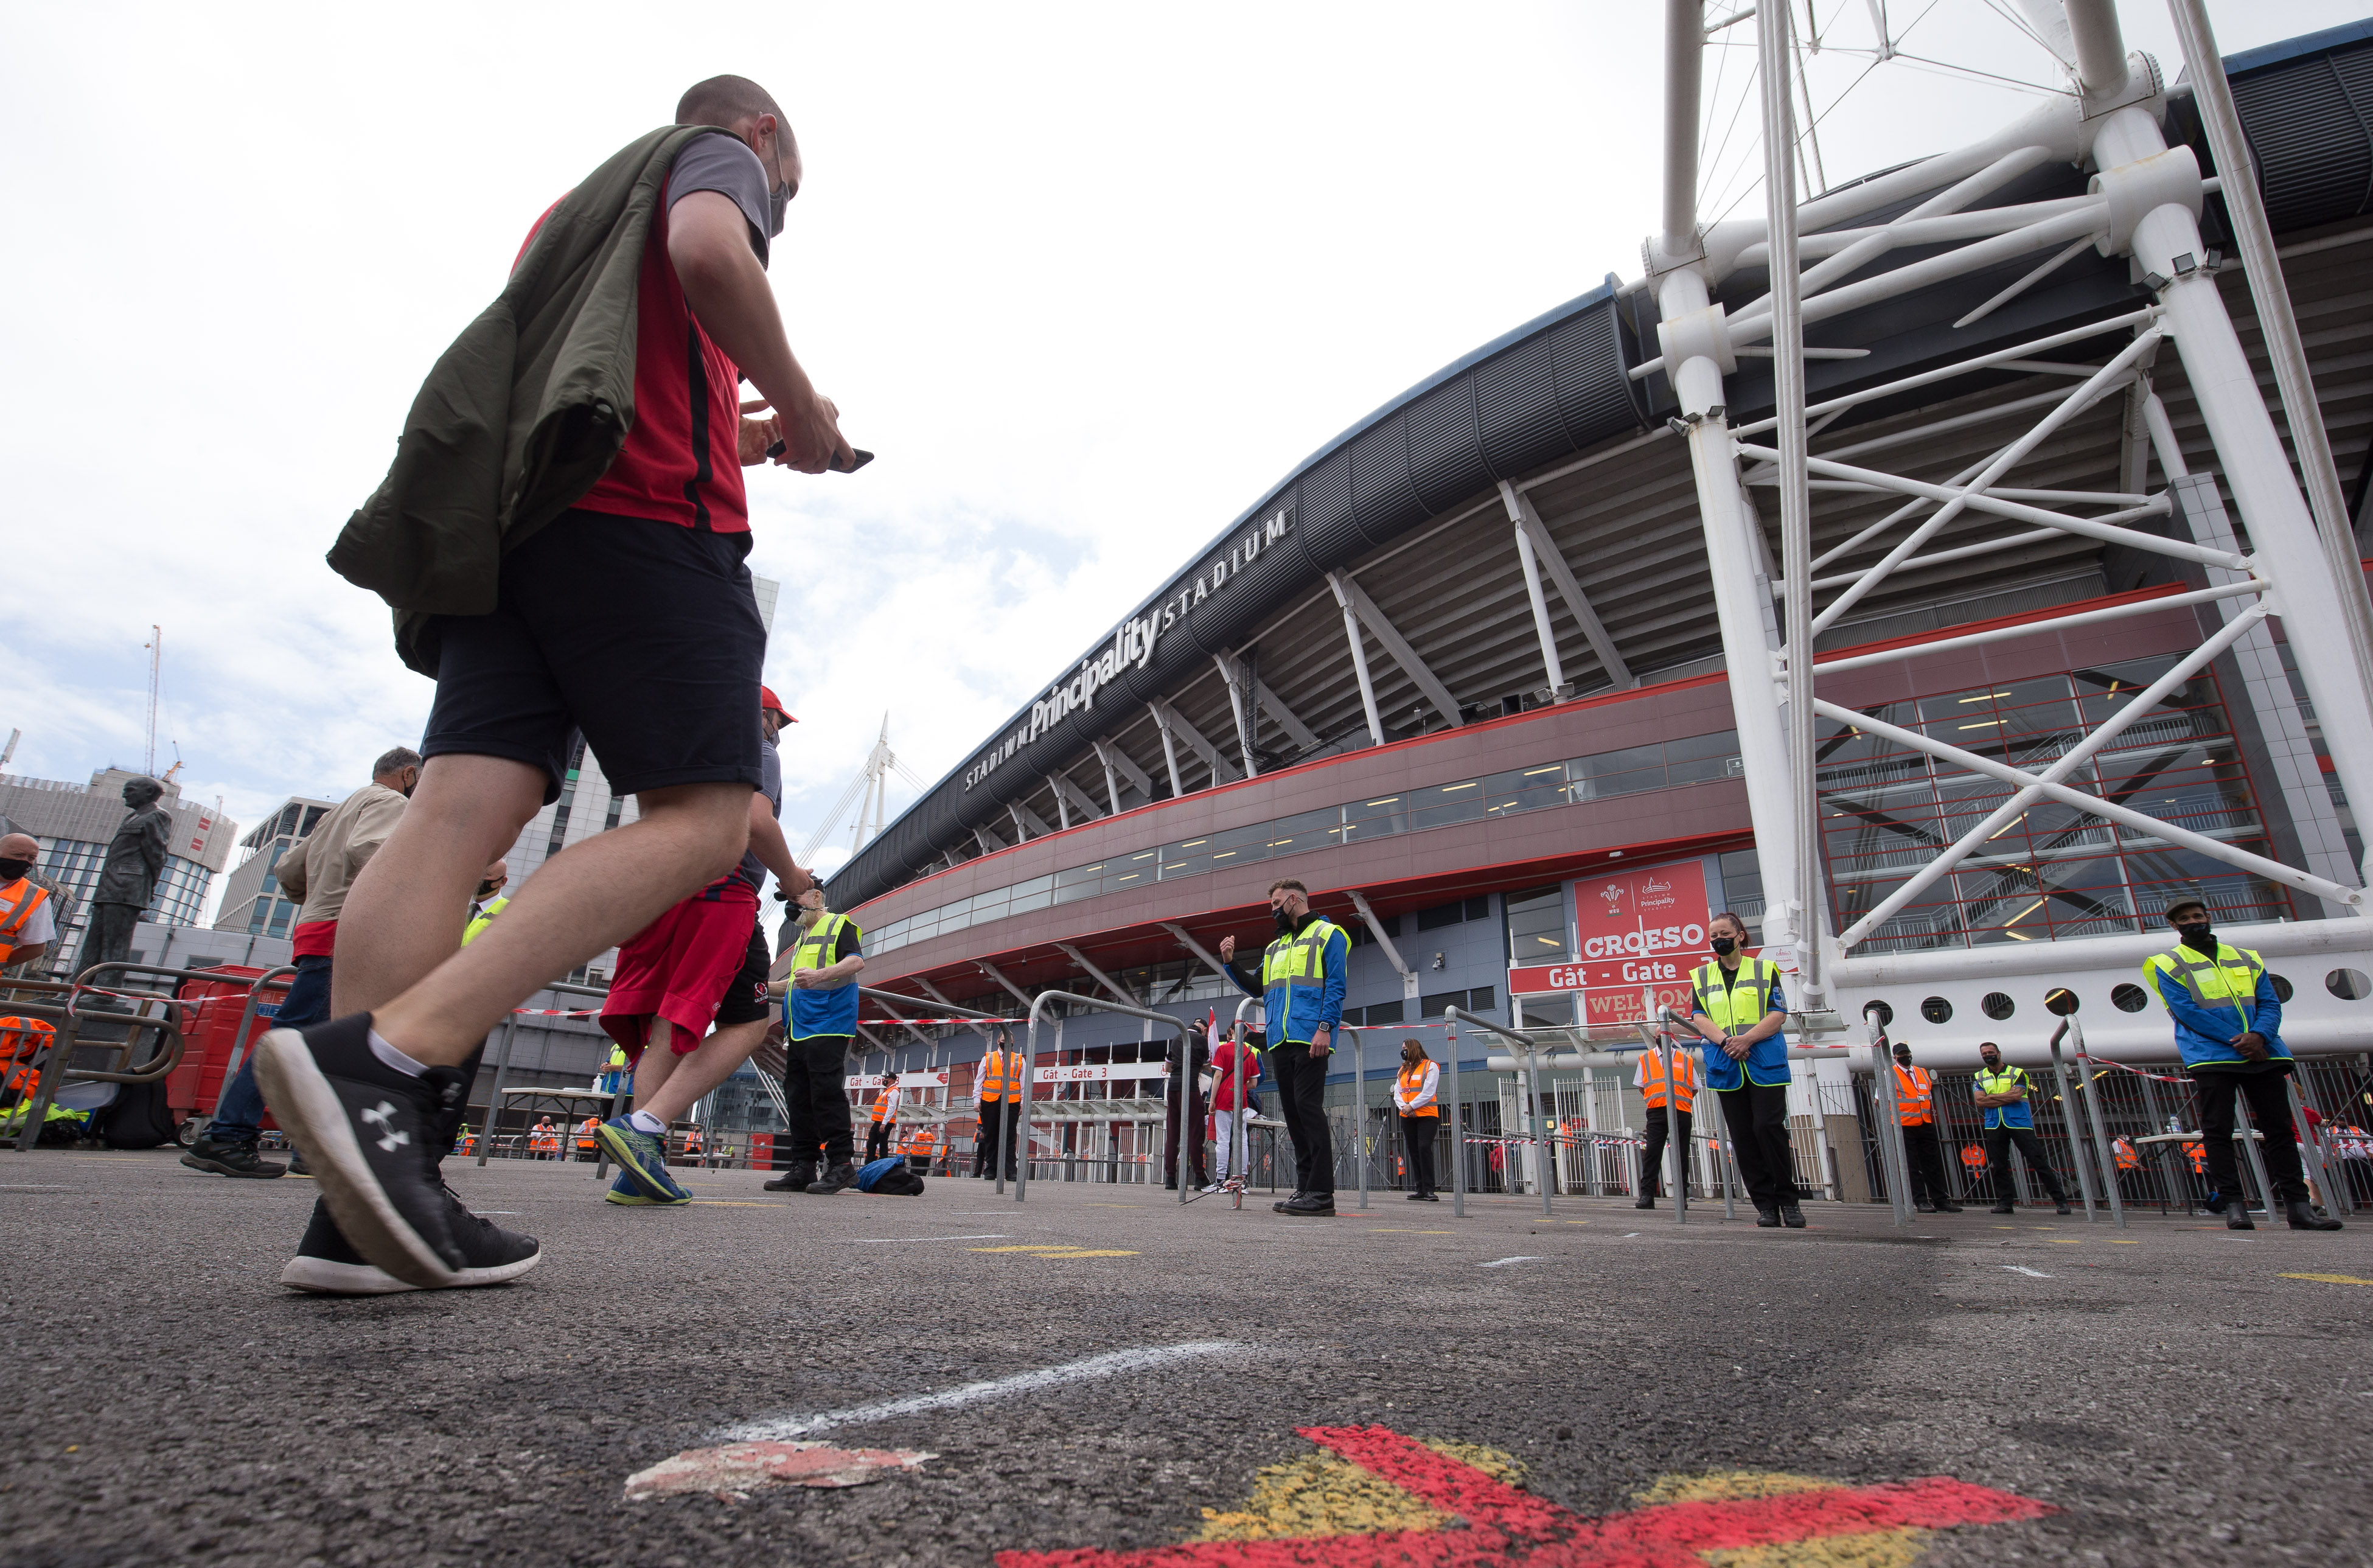 COVID Passes no longer required for Principality Stadium